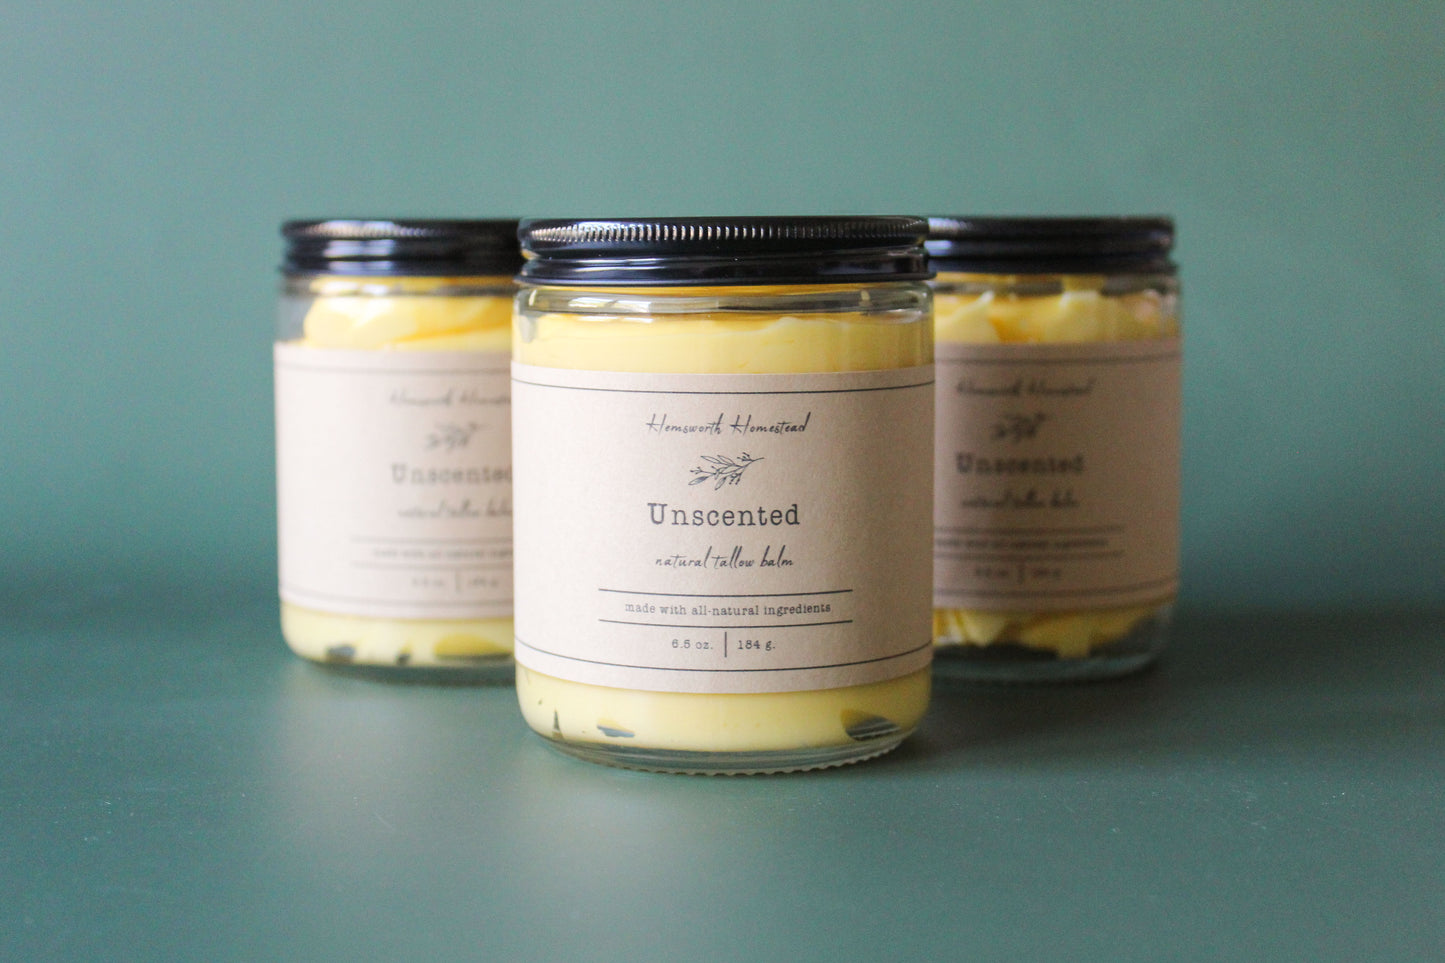 Pure + Simple Tallow Balm (formerly named Unscented)